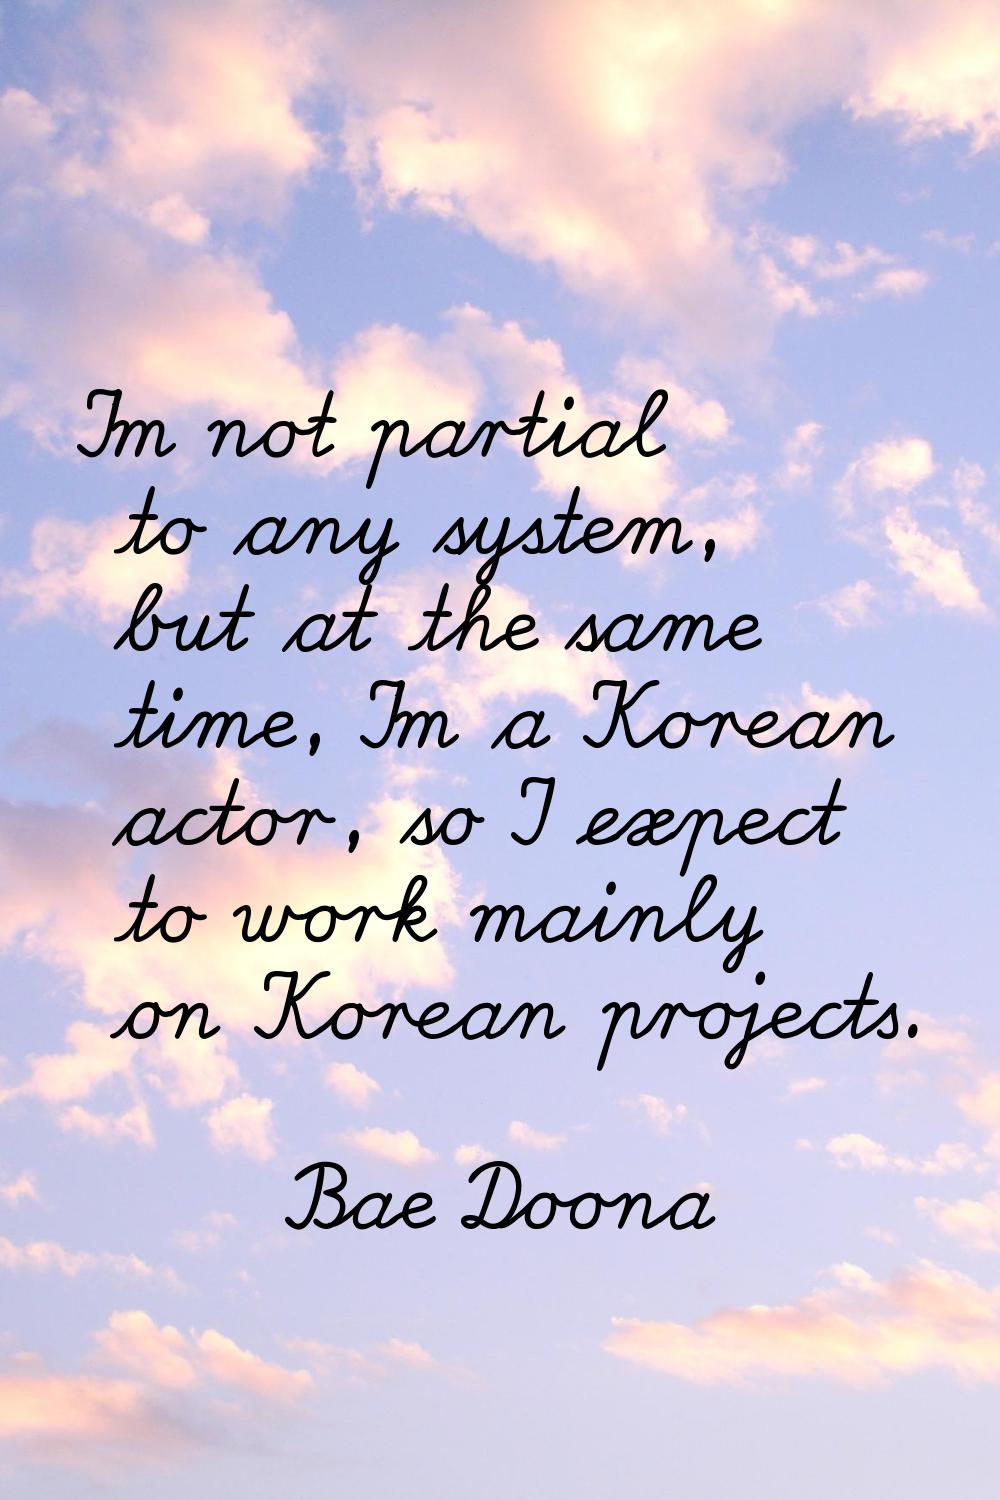 I'm not partial to any system, but at the same time, I'm a Korean actor, so I expect to work mainly